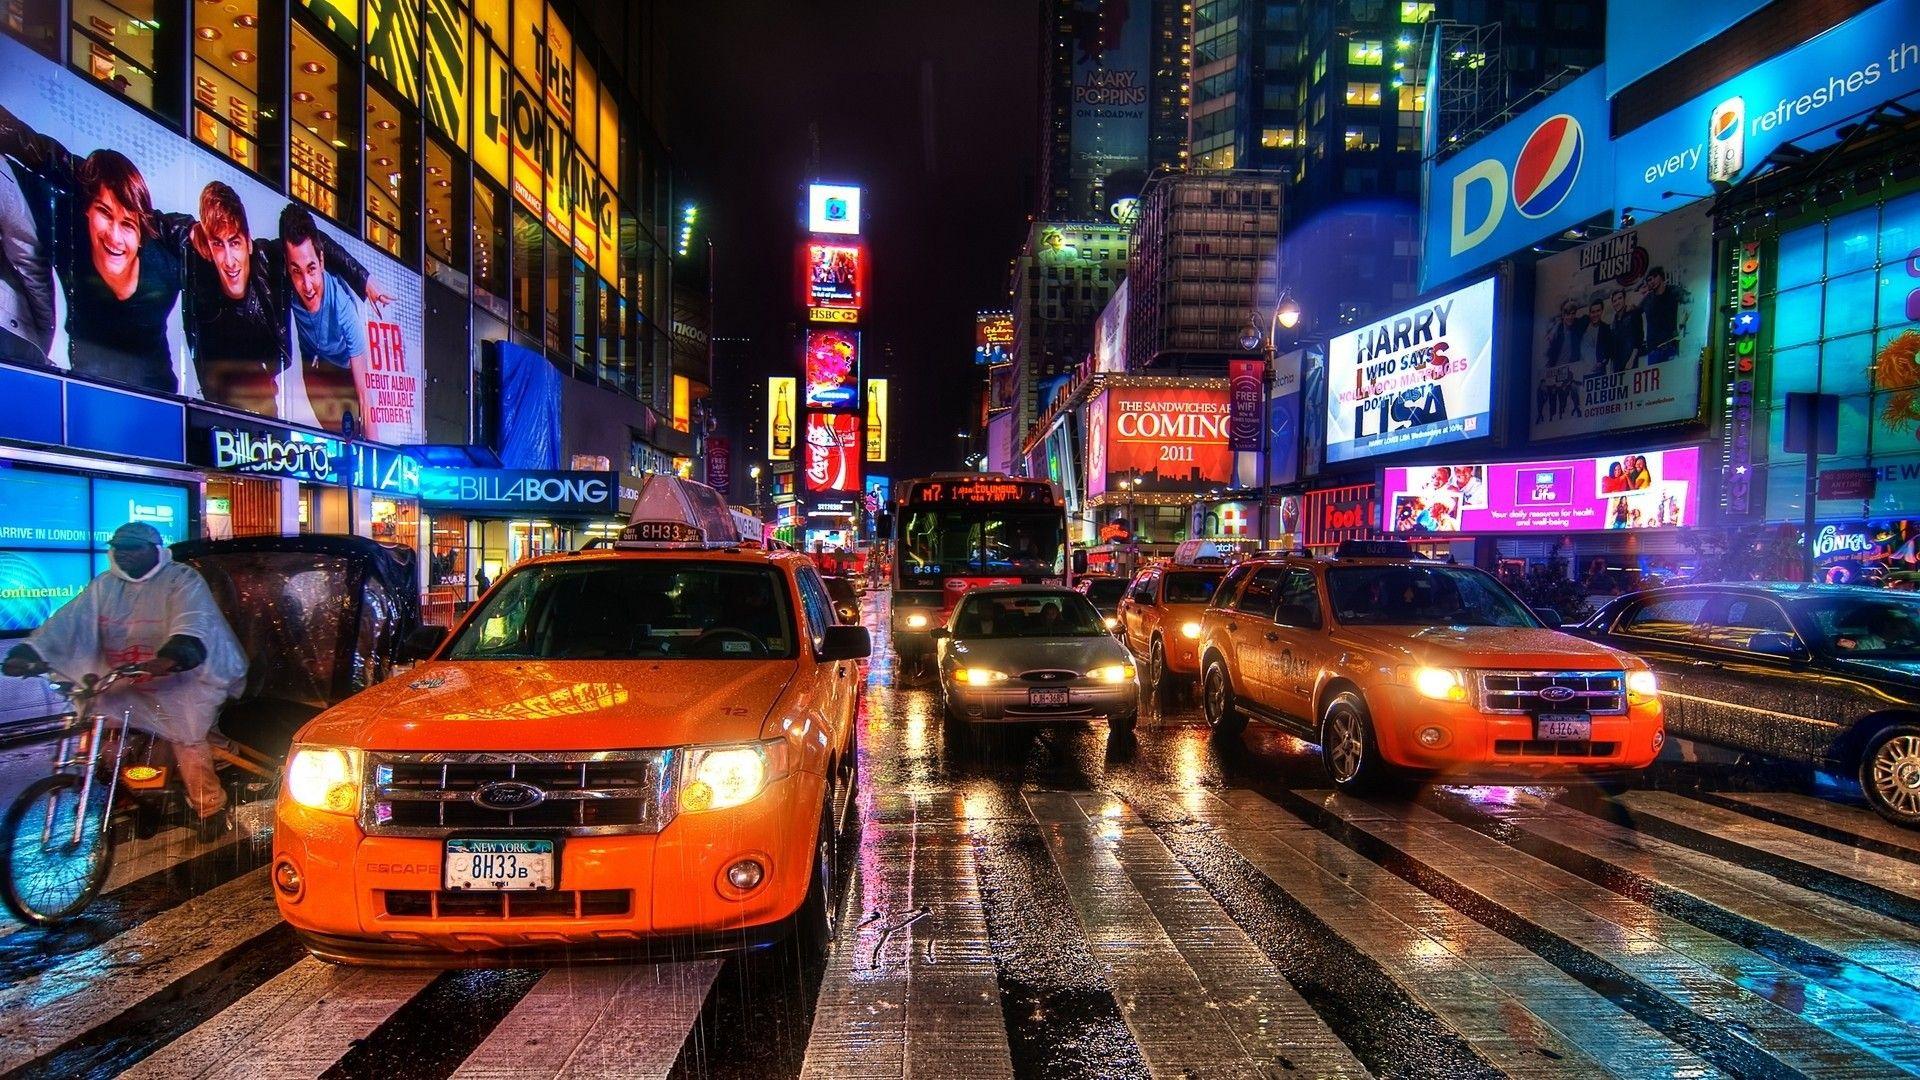 HD New York City Wallpaper Background For Free Download